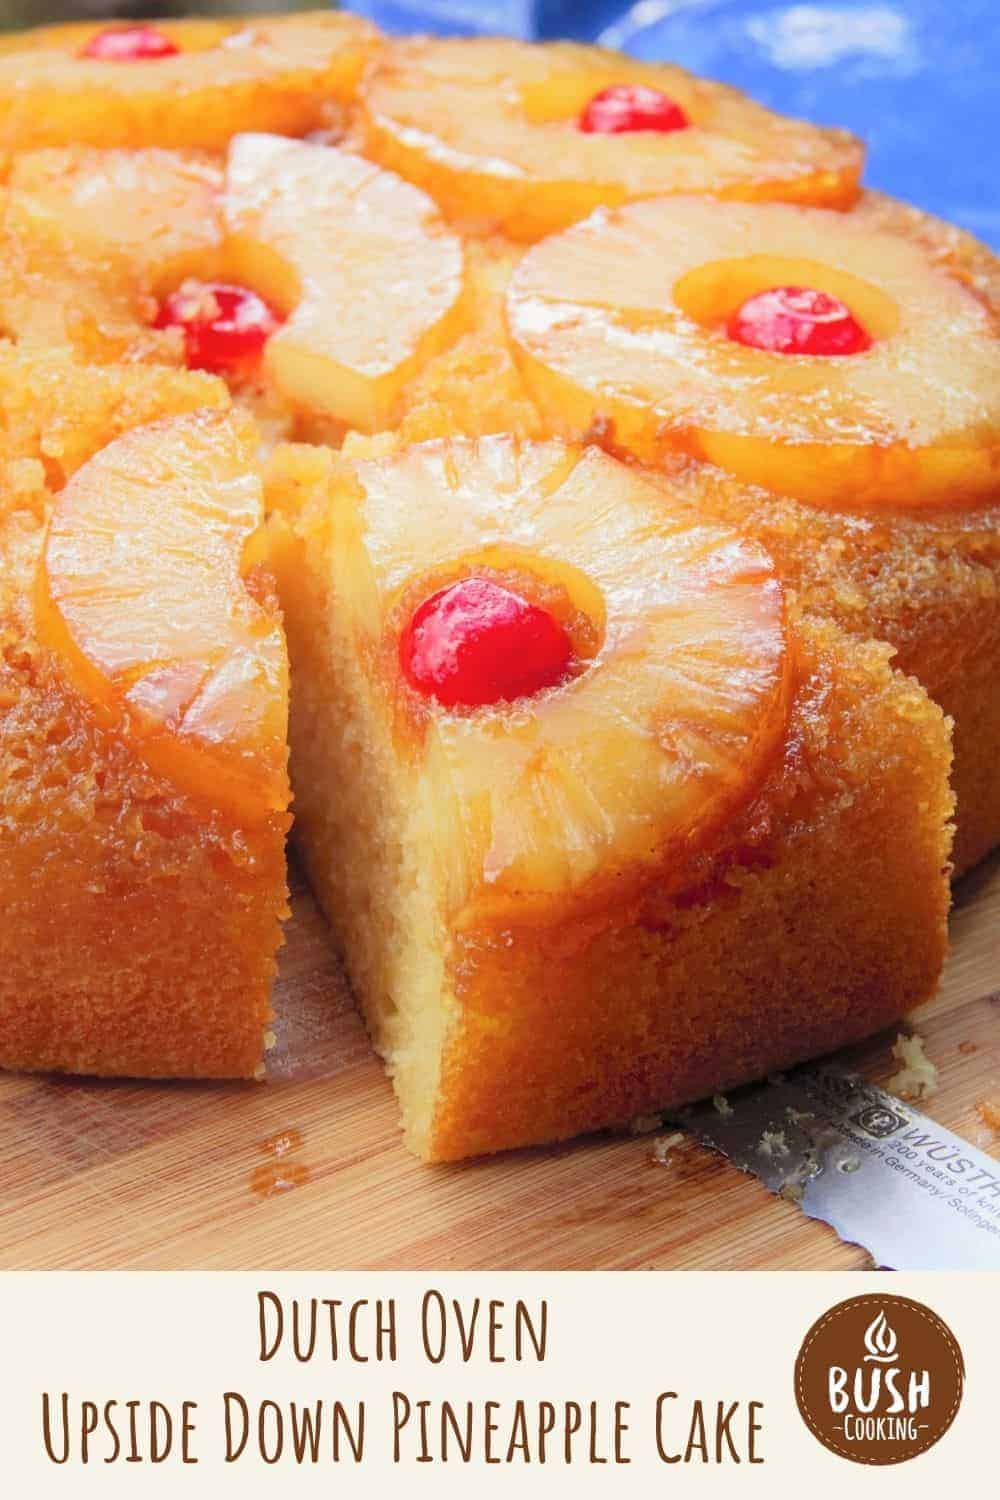 Grilled Pineapple Upside Down Cakes - One Hot Oven